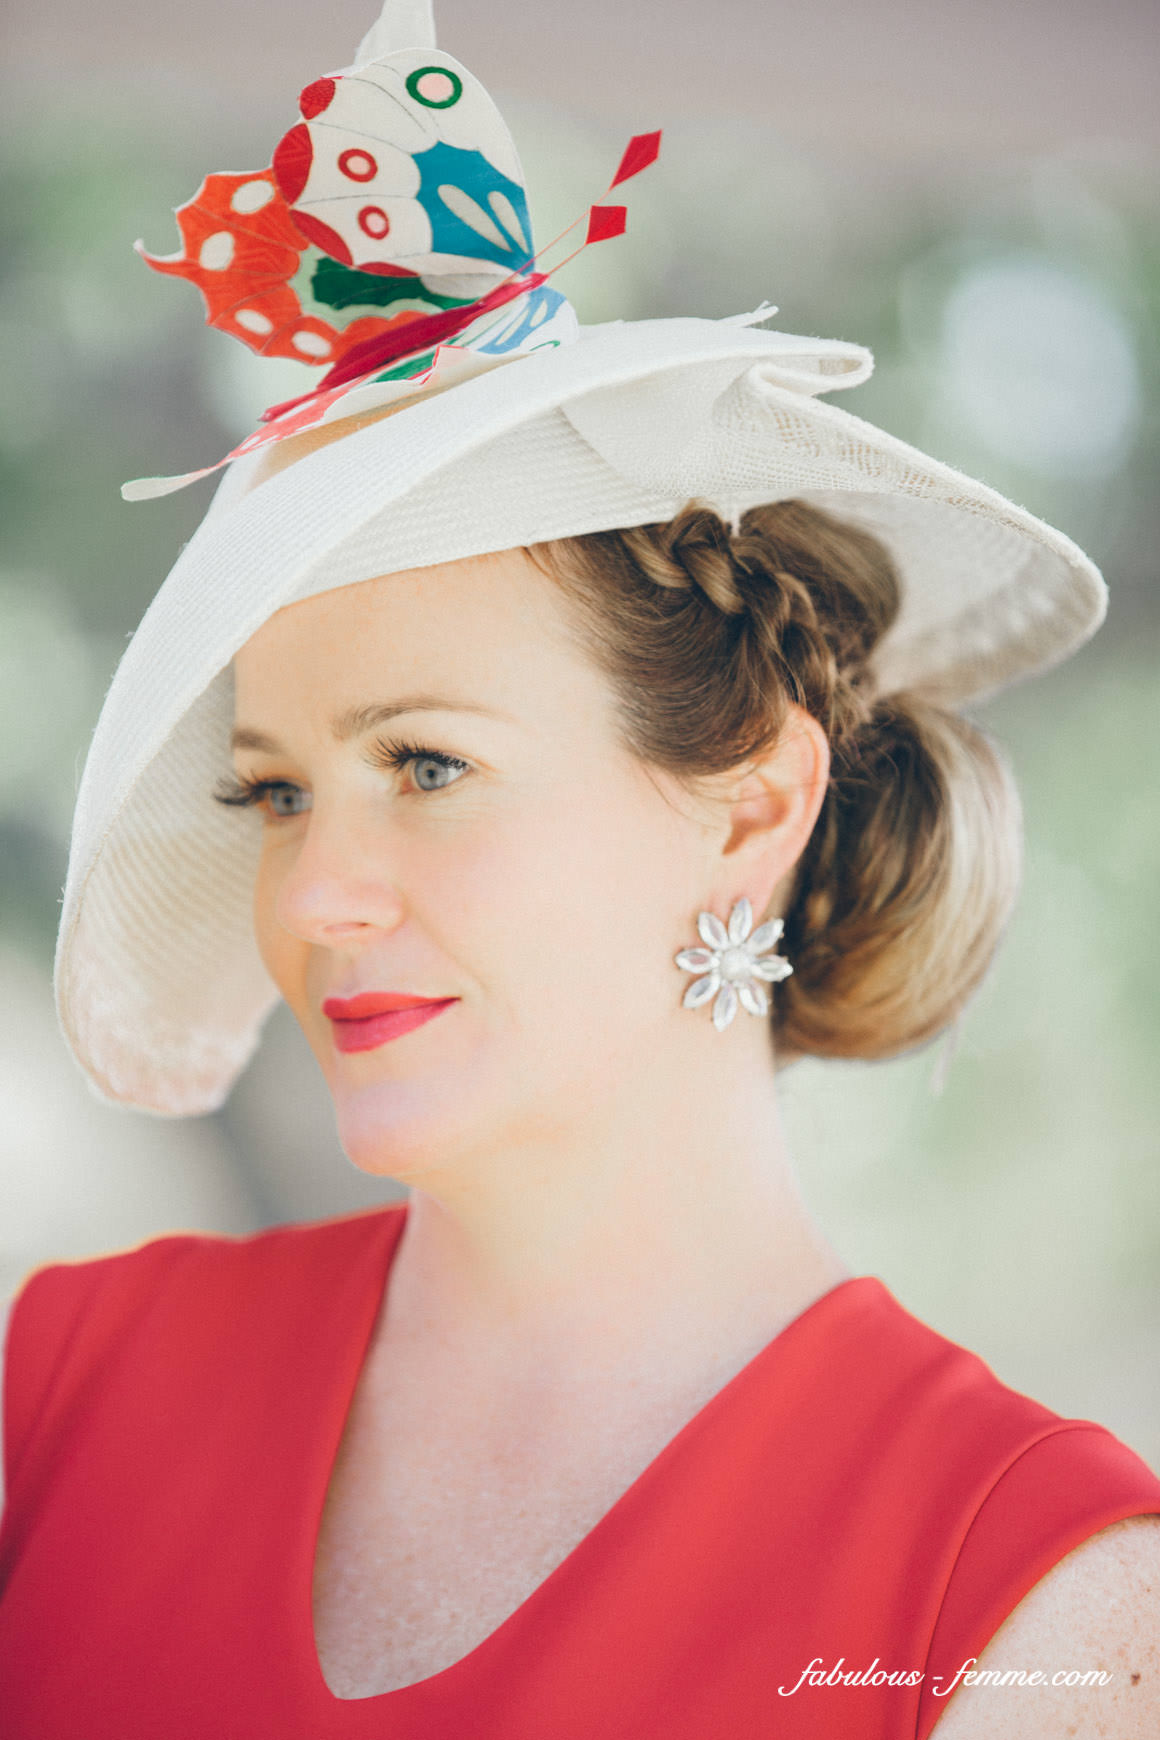 spring racing - best event photography melbourne